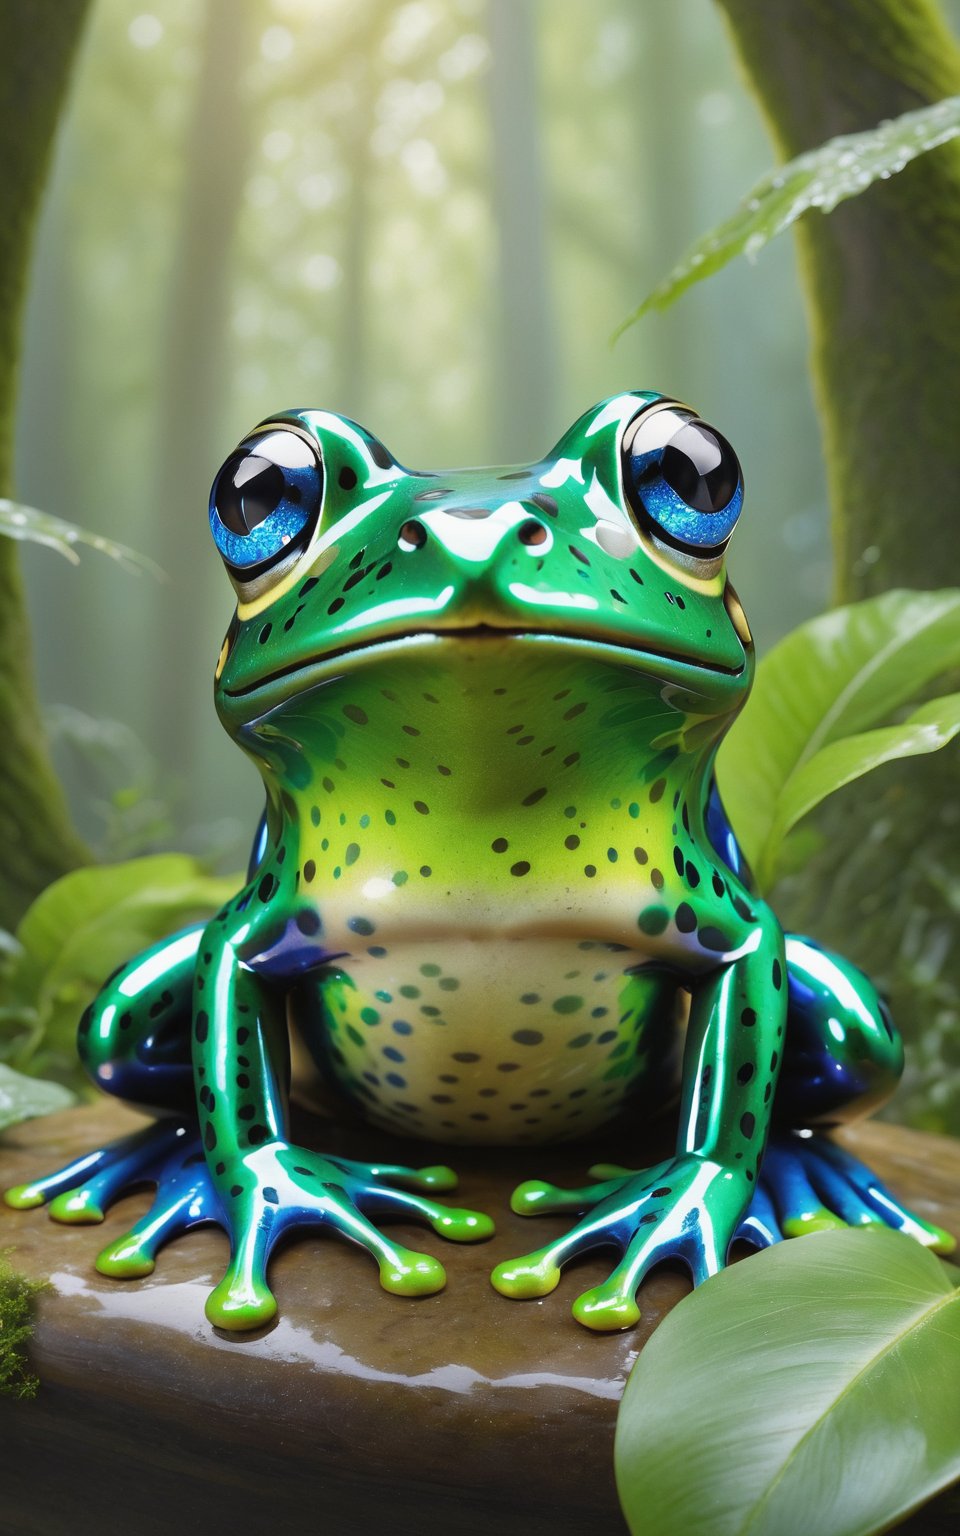 (best quality,8K,highres,masterpiece), ultra-detailed, (frog with dark green skin with glittering spots, marble-colored wings, and blue eyes), a magnificent frog with dark green skin adorned with glittering spots. It possesses two marble-colored wings that shimmer in the light, adding to its ethereal beauty. Its piercing blue eyes captivate the viewer, conveying intelligence and mystique. The background depicts a lush forest, with towering trees and dappled sunlight filtering through the canopy. The overall composition is enchanting and serene, inviting viewers to explore the magical world of this extraordinary frog.